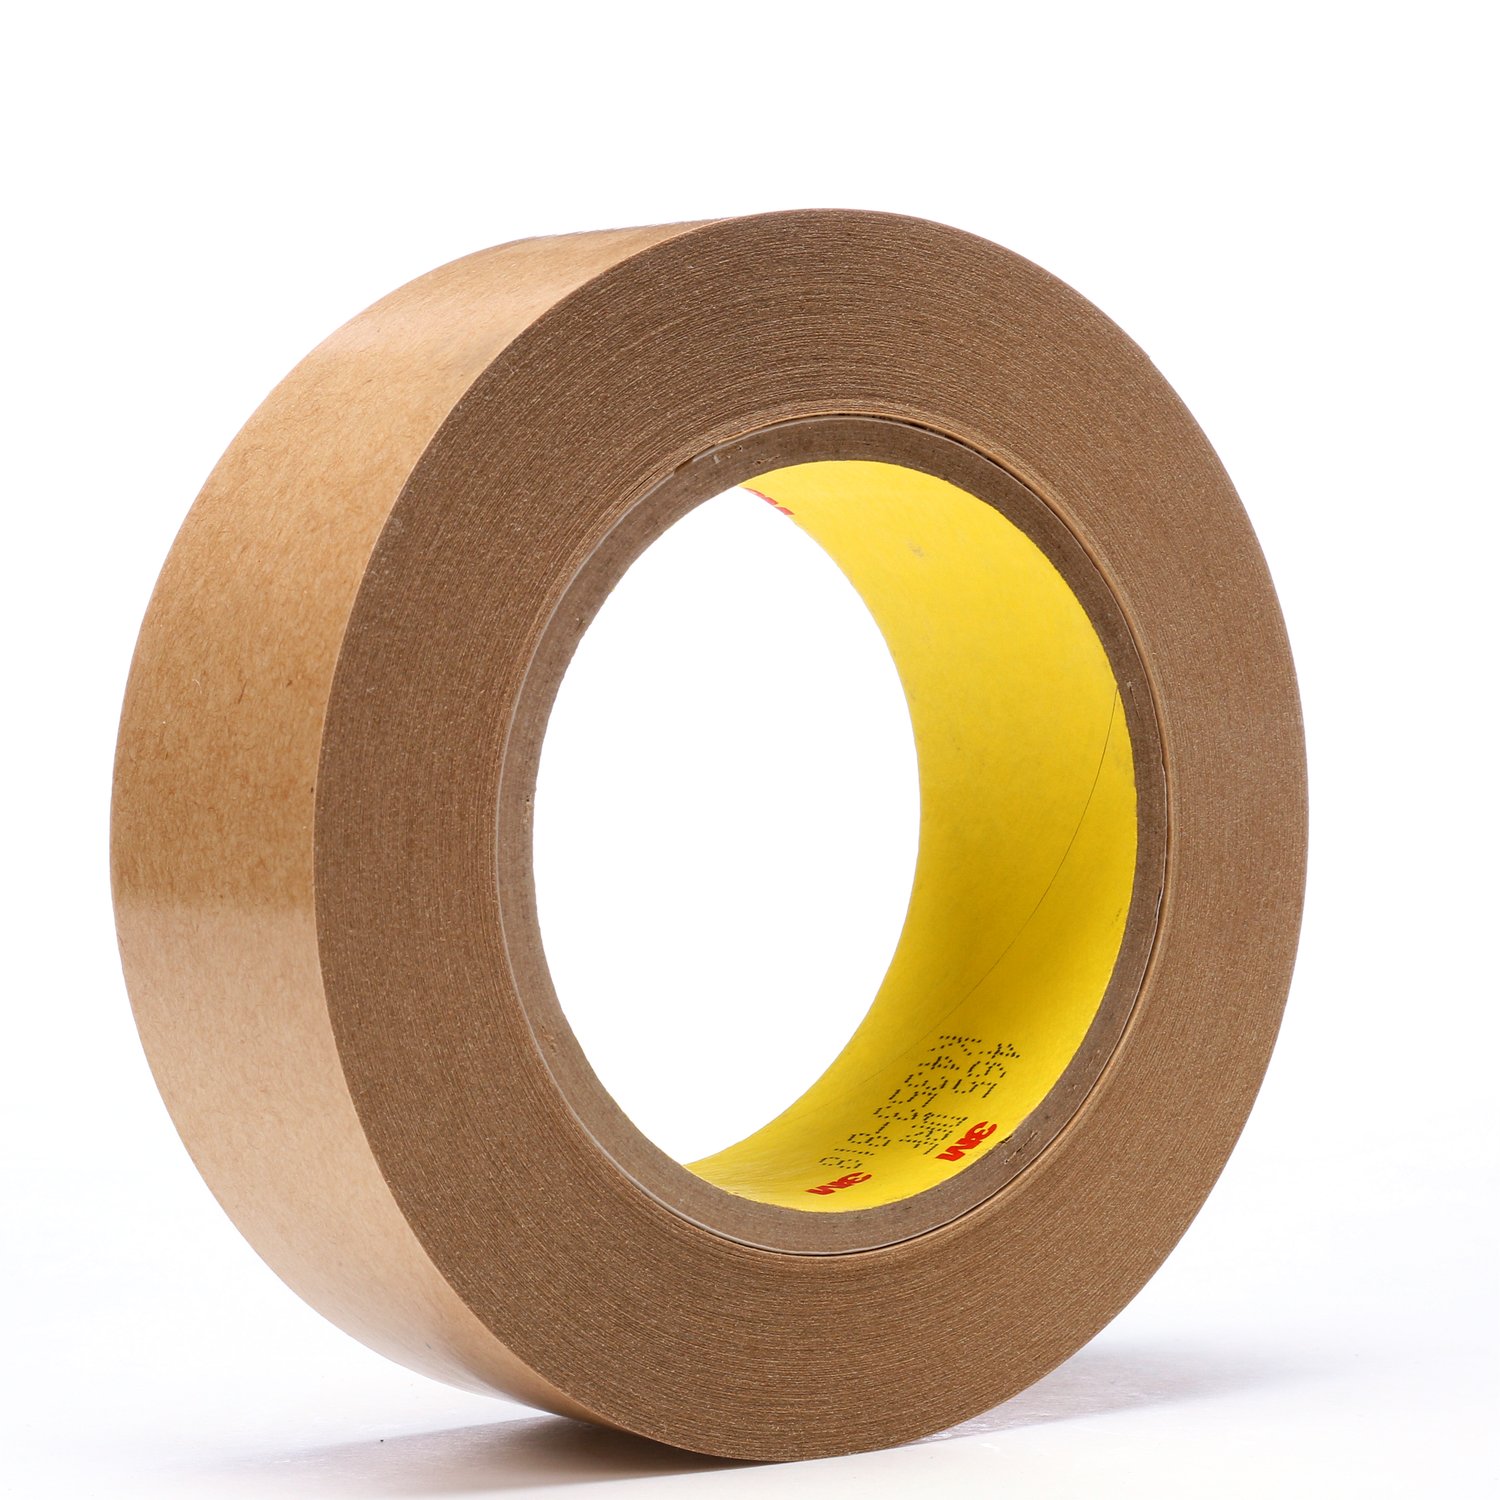 7100276866 - 3M Adhesive Transfer Tape 465, Clear, 1 1/2 in x 60 yd, 24 Rolls/Case